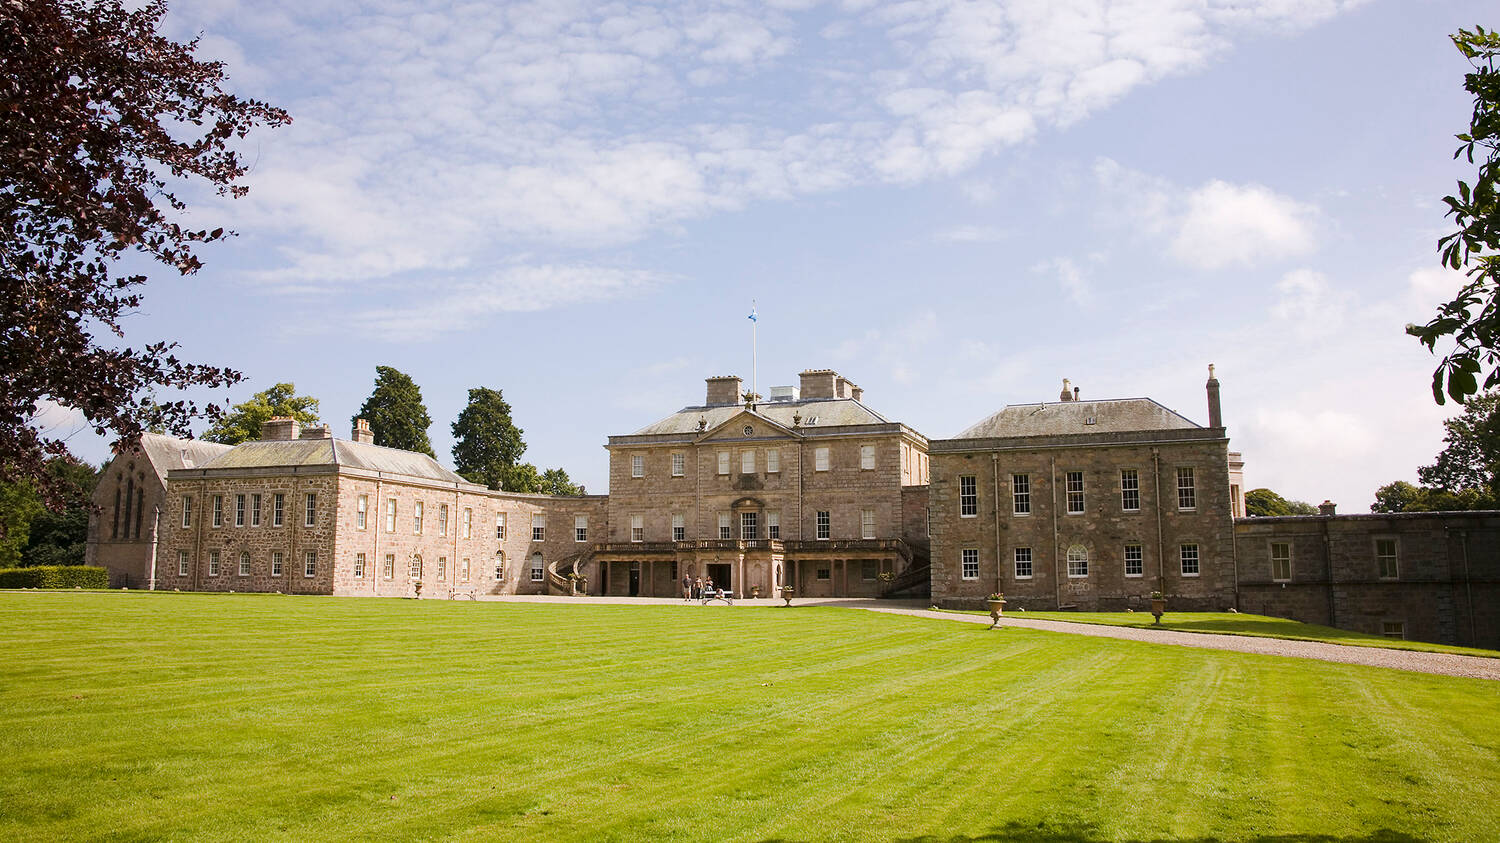 A view of a very large country house, seen from across a very neat lawn.